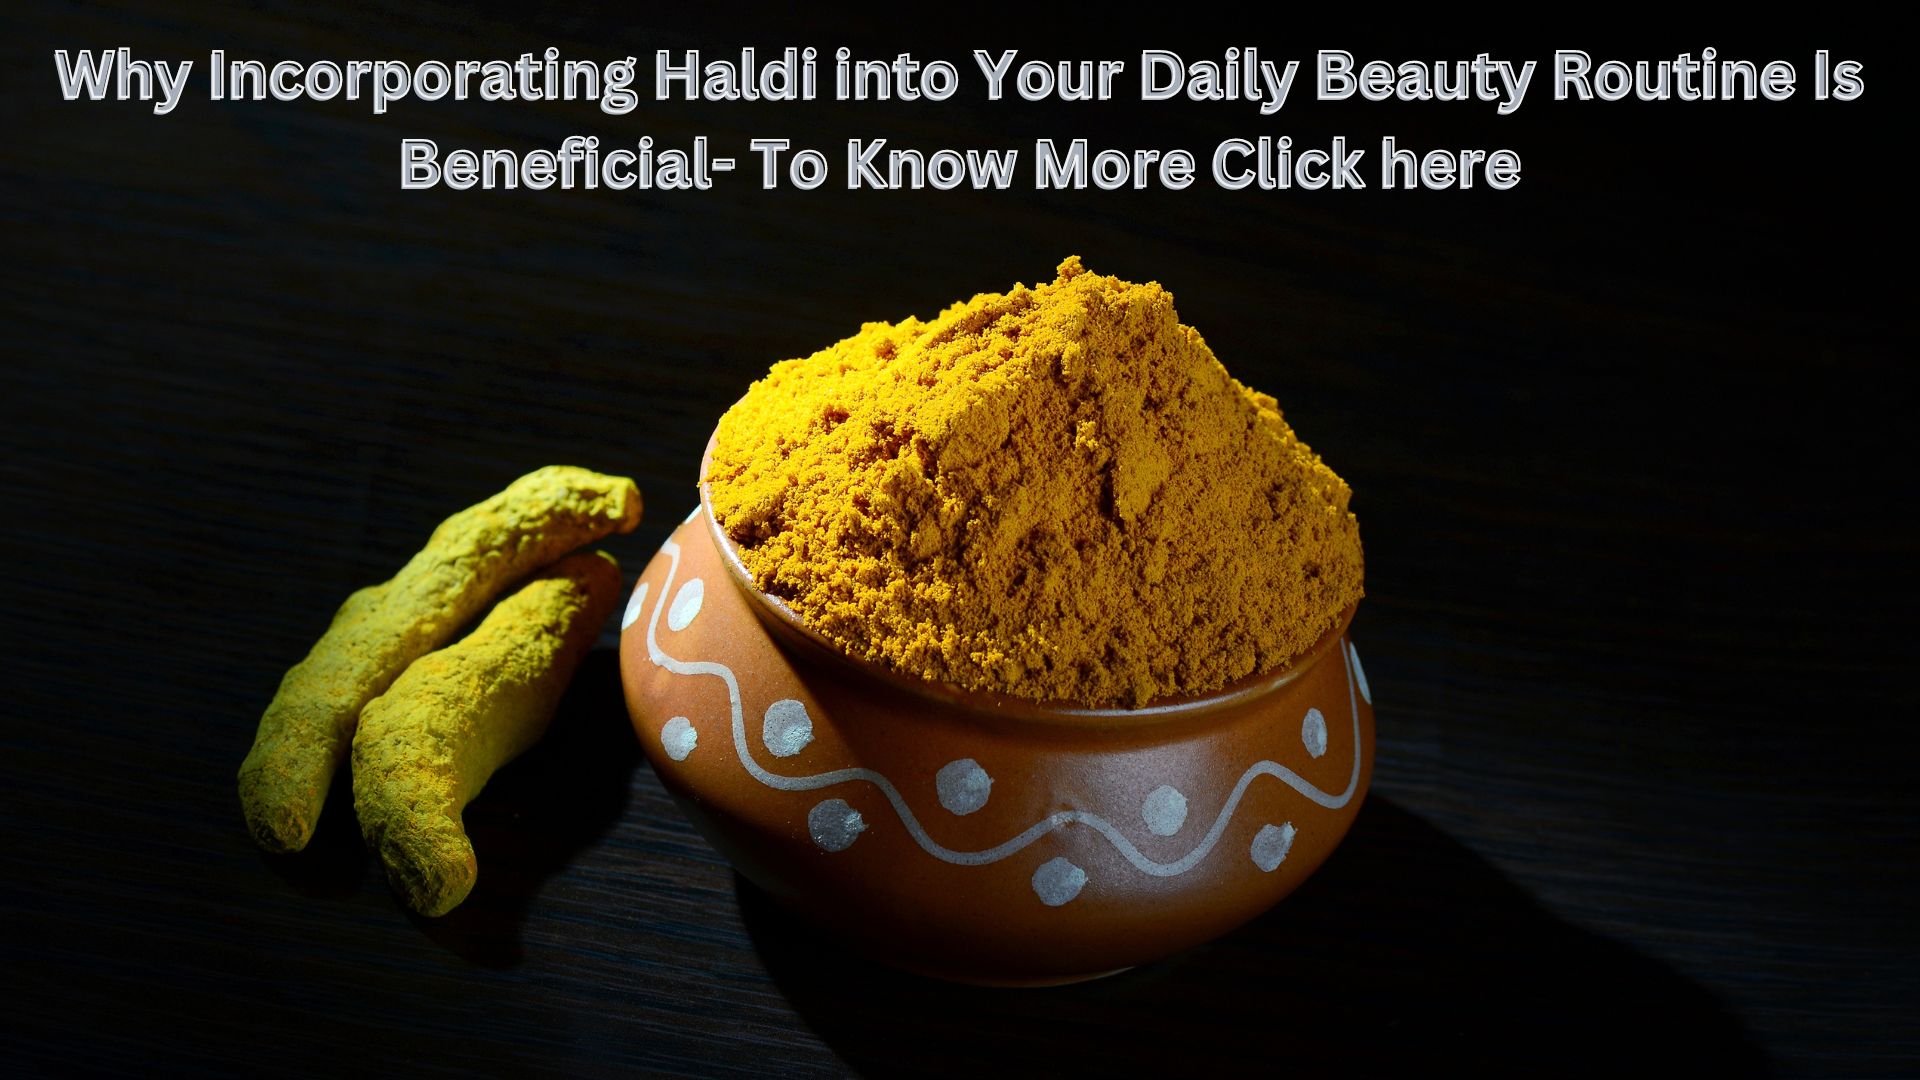 Why Incorporating Haldi into Your Daily Beauty Routine Is Beneficial- To Know More Click here